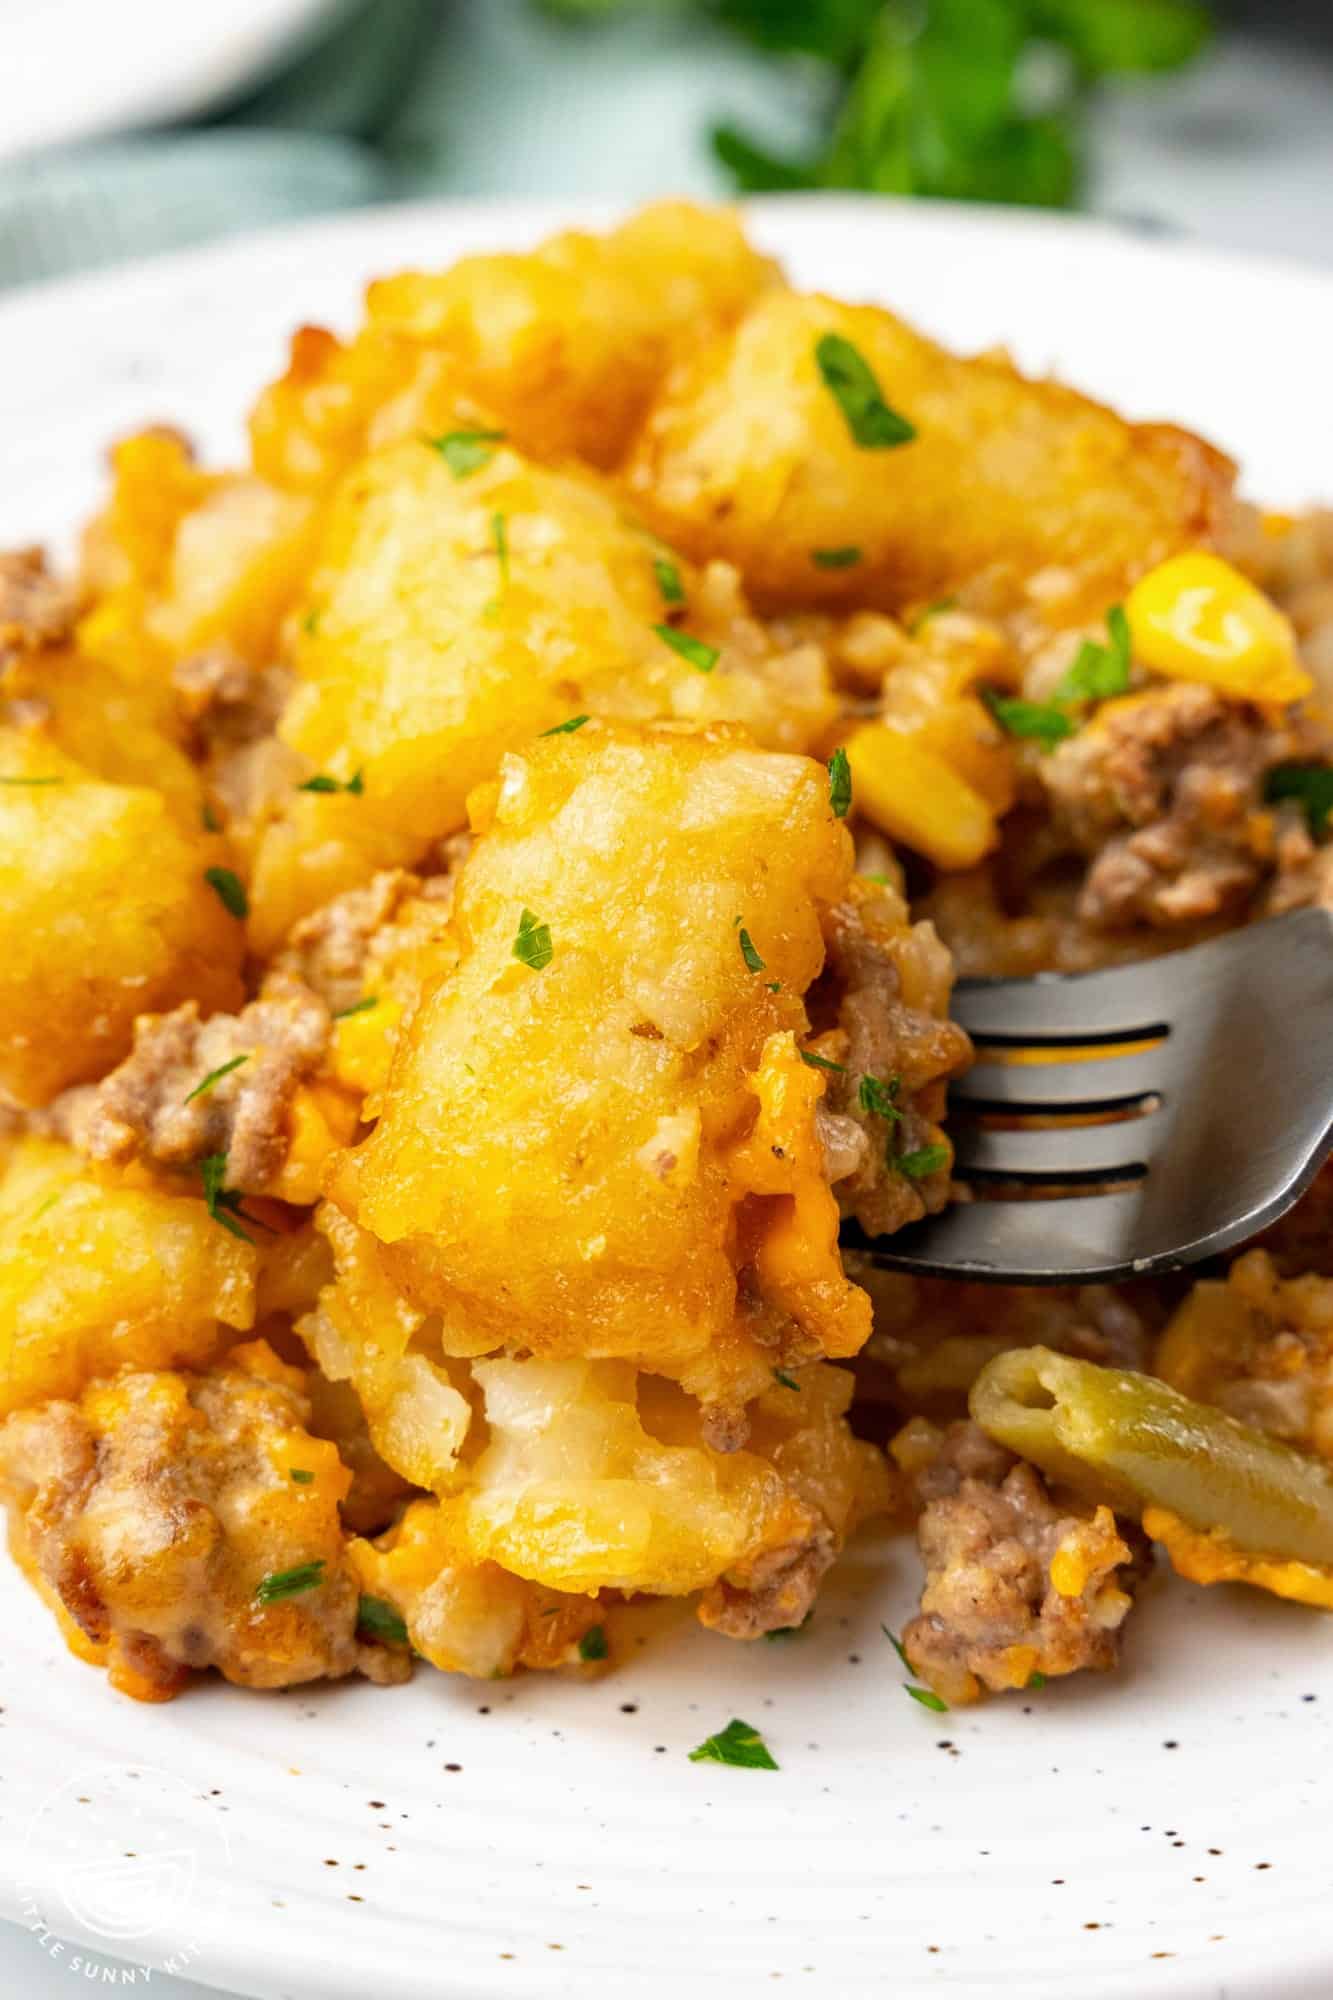 tater tot casserole on a plate, a fork is picking up a bite.